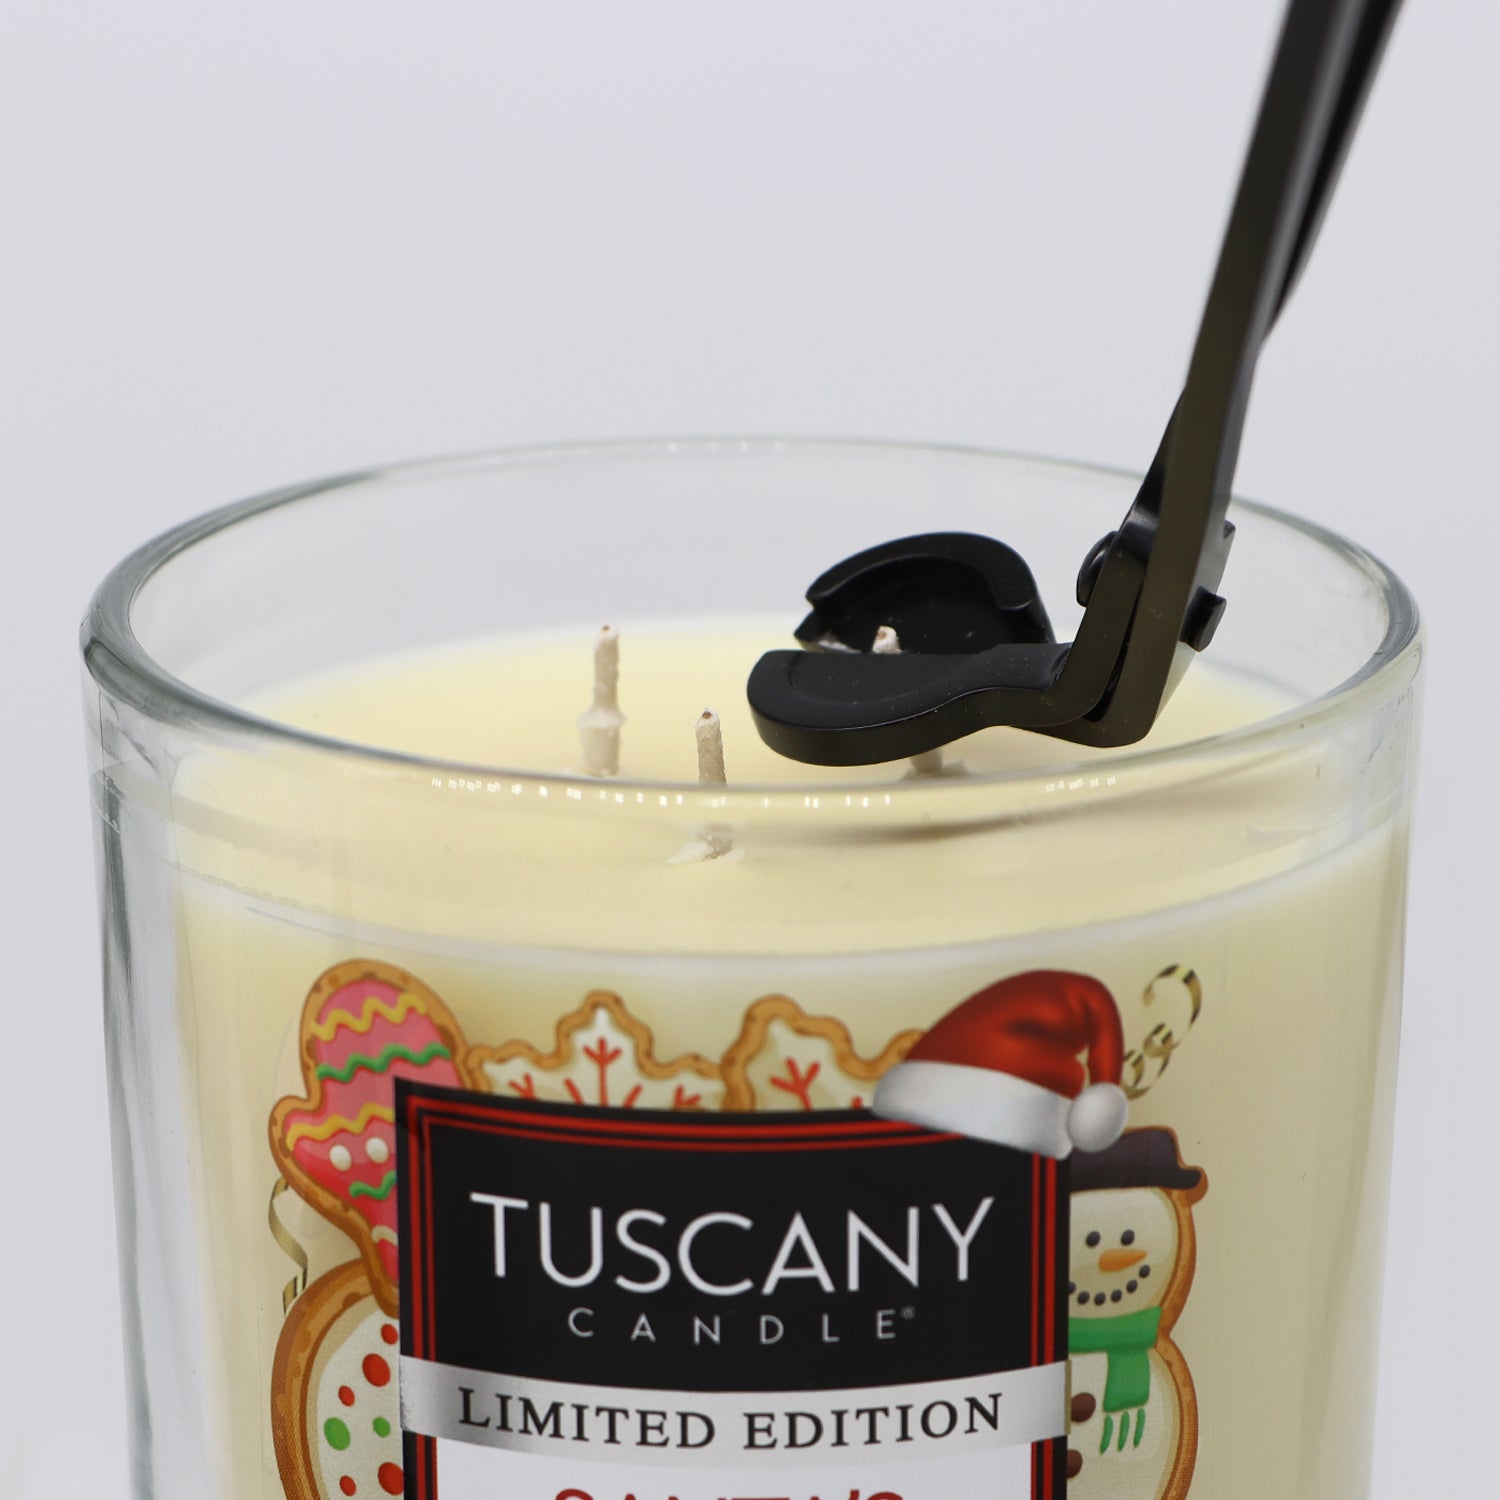 A 3-Piece Candle Care Set by Tuscany Candle, including a candle in a glass with a stainless steel spoon for added elegance and candle care.